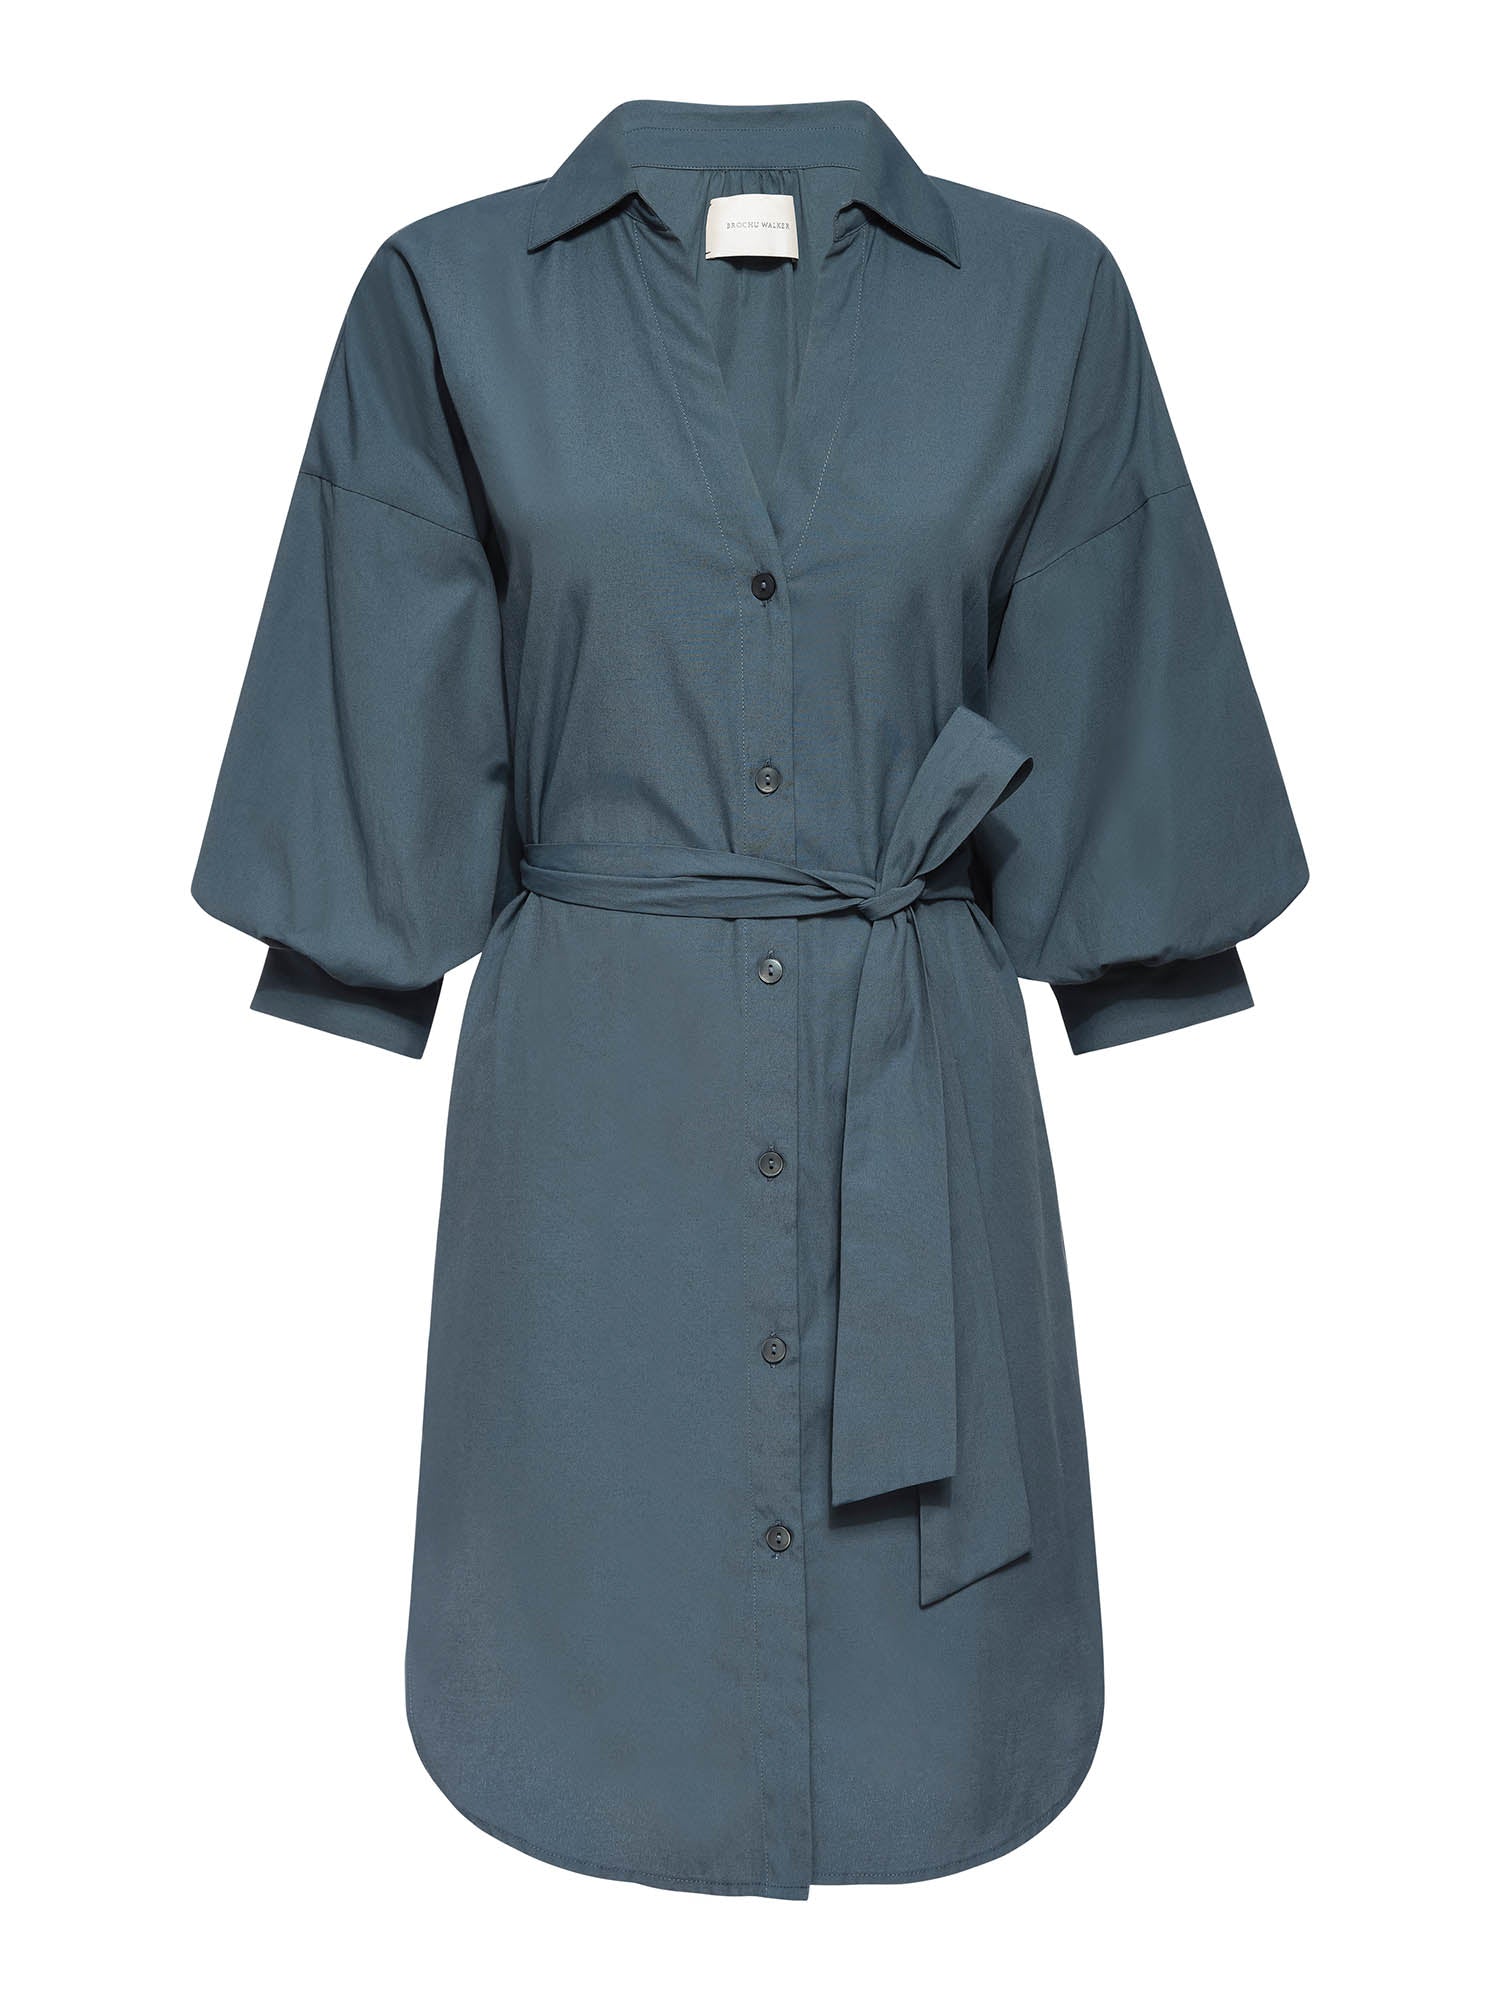 Kate belted button up mini dress blue gray flat view